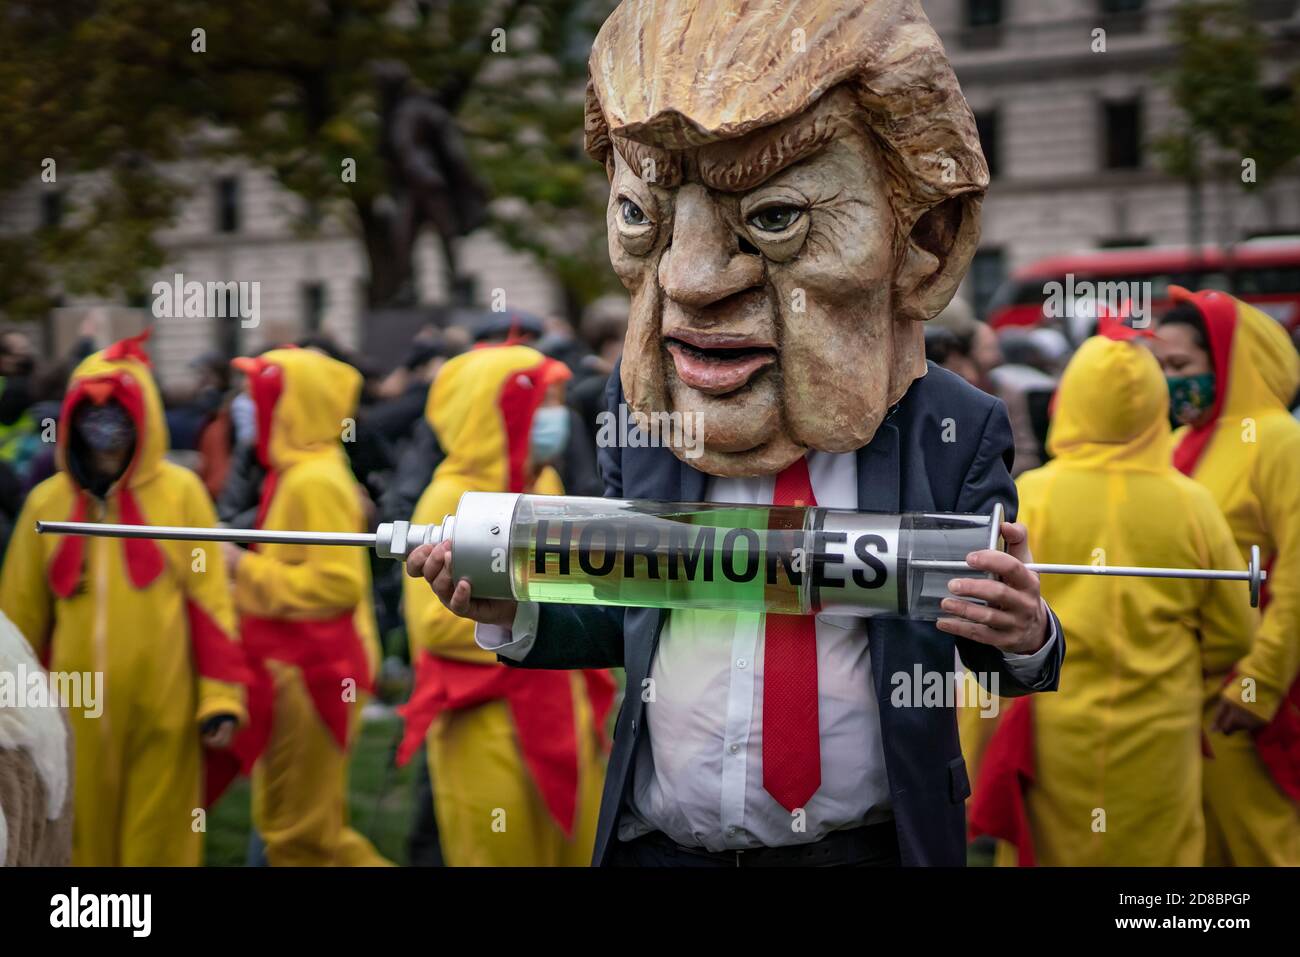 ‘Stop The US Trade Deal’ protest in Parliament Square featuring a Donald Trump caricature trying to inject a pantomime cow with growth hormones, UK. Stock Photo